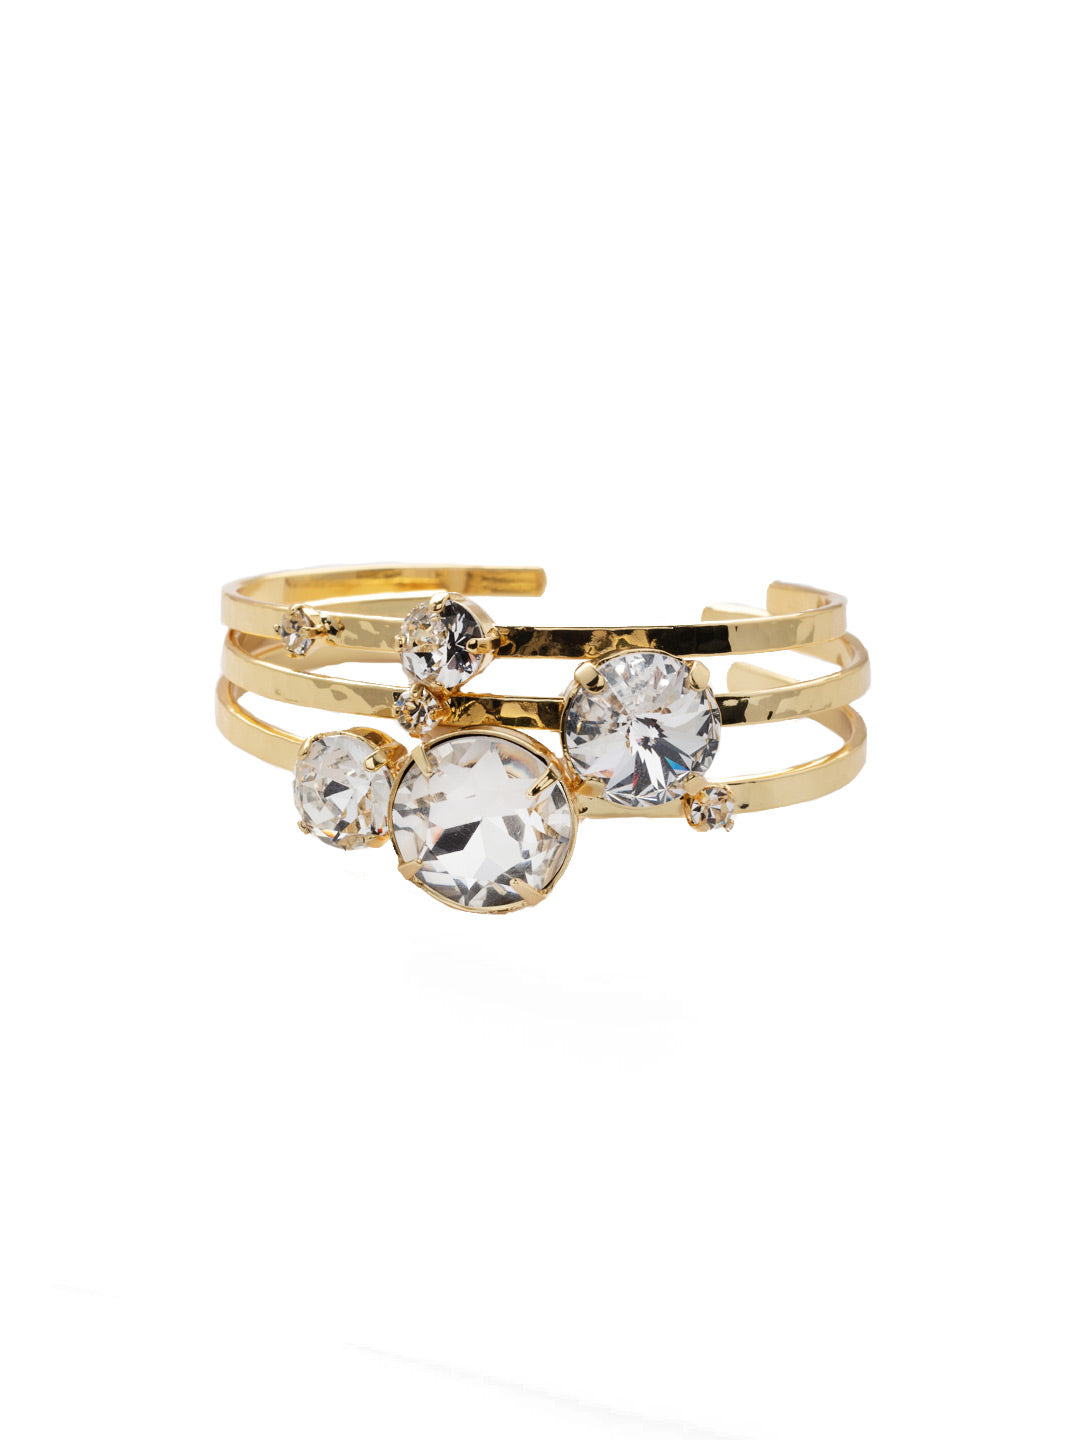 Nadine Stacked Bracelet - 4BEZ18BGCRY - <p>The Nadine Stacked Bracelet creates a beautiful layered look. Three adjustable cuff bands feature an assortment of round crystals. From Sorrelli's Crystal collection in our Bright Gold-tone finish.</p>